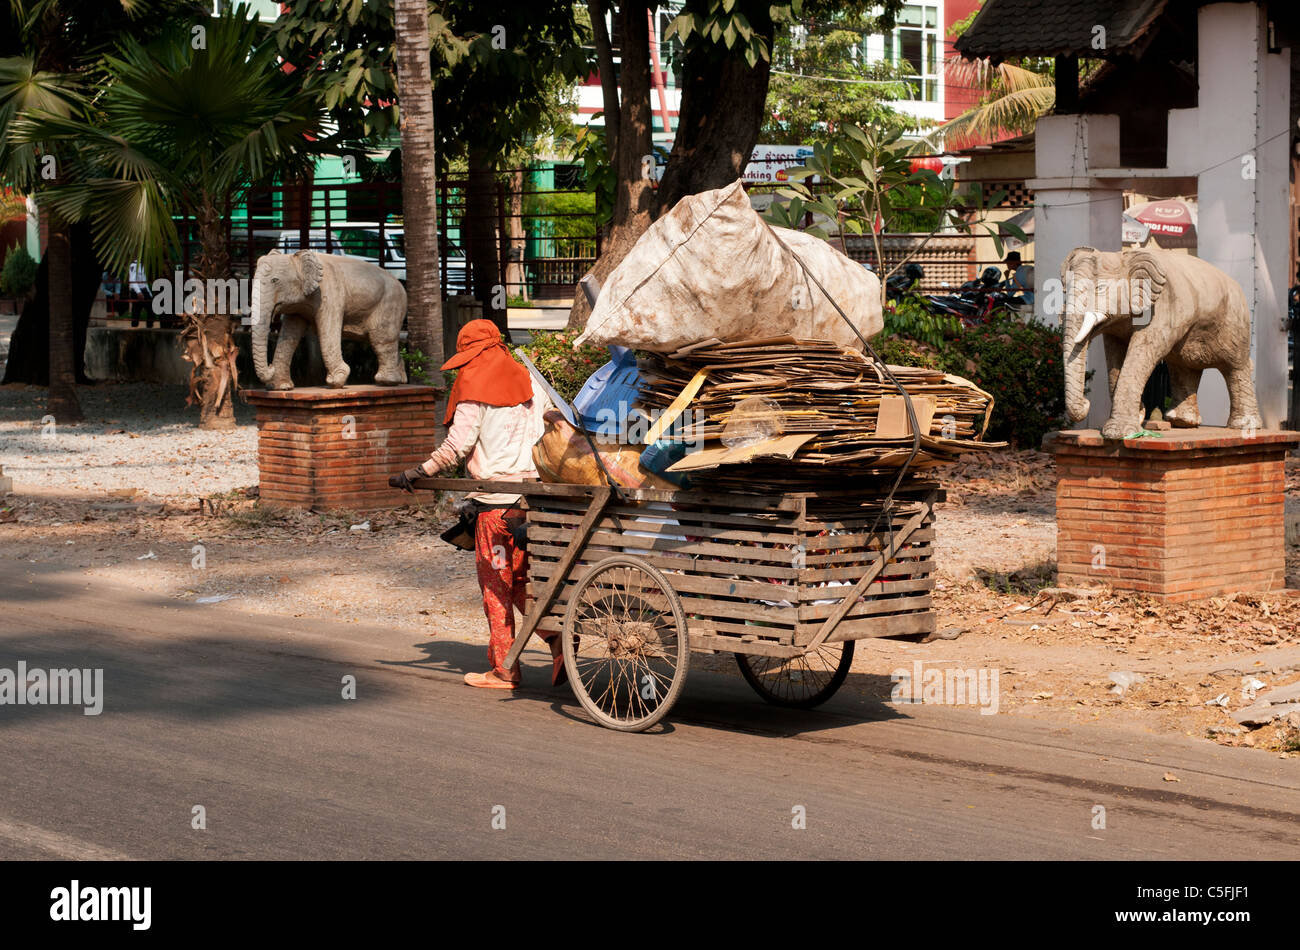 Recycled materials scavenger pulling a handcart piled with cardboard and plastic waste, Siem Reap, Cambodia Stock Photo